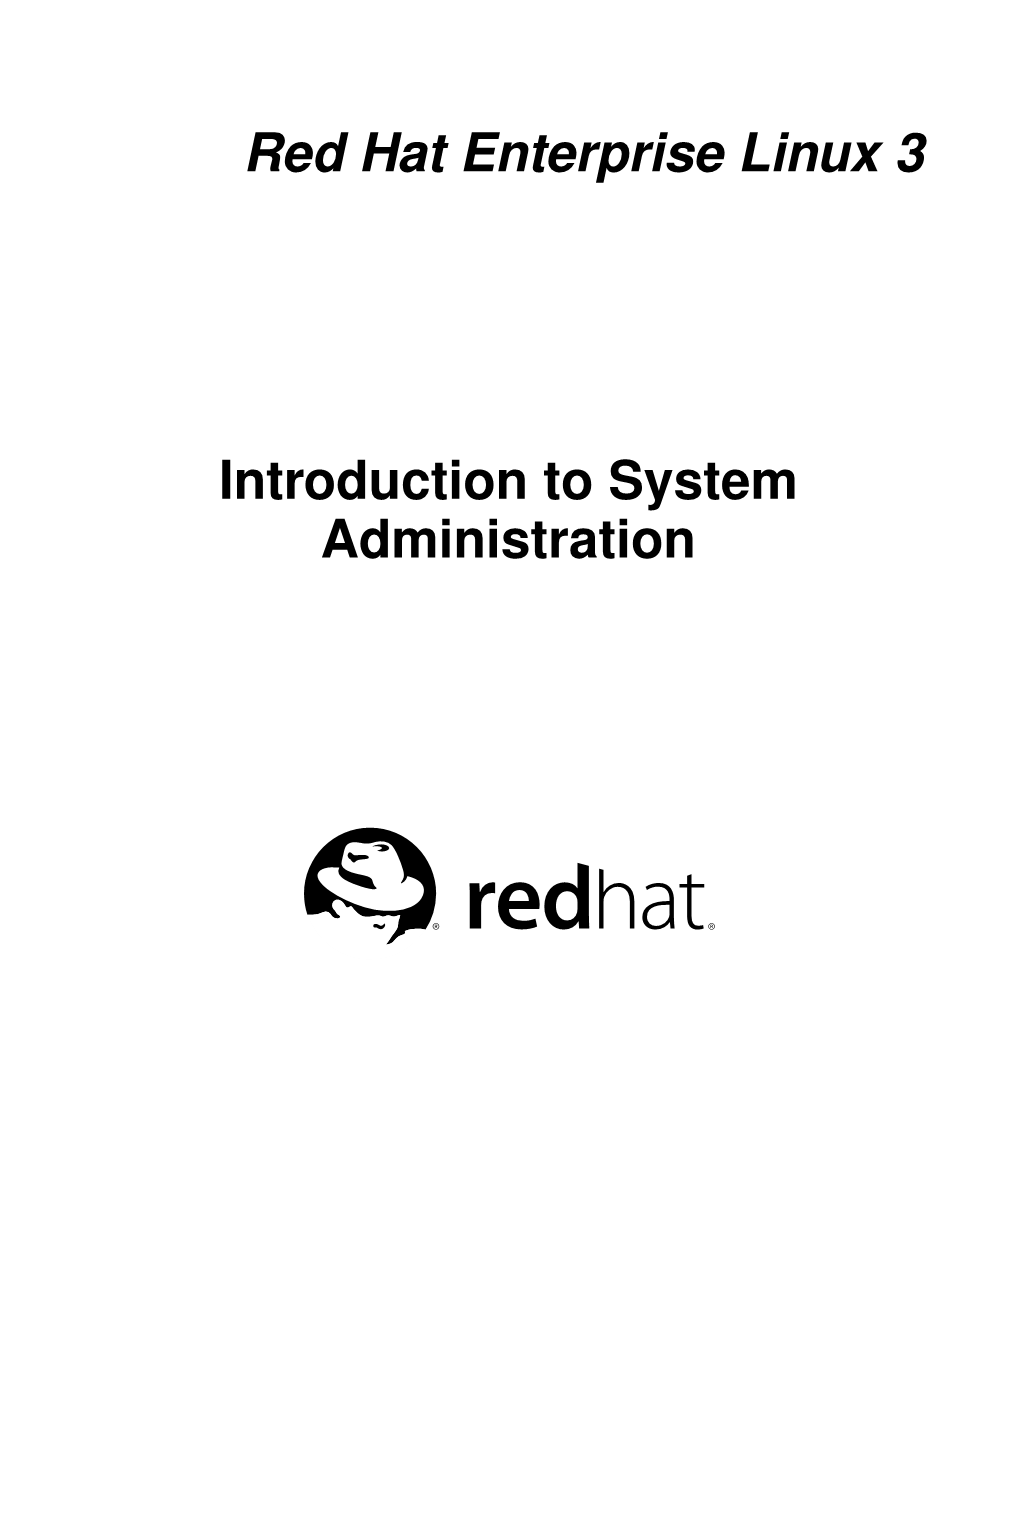 Red Hat Enterprise Linux 3 Introduction to System Administration